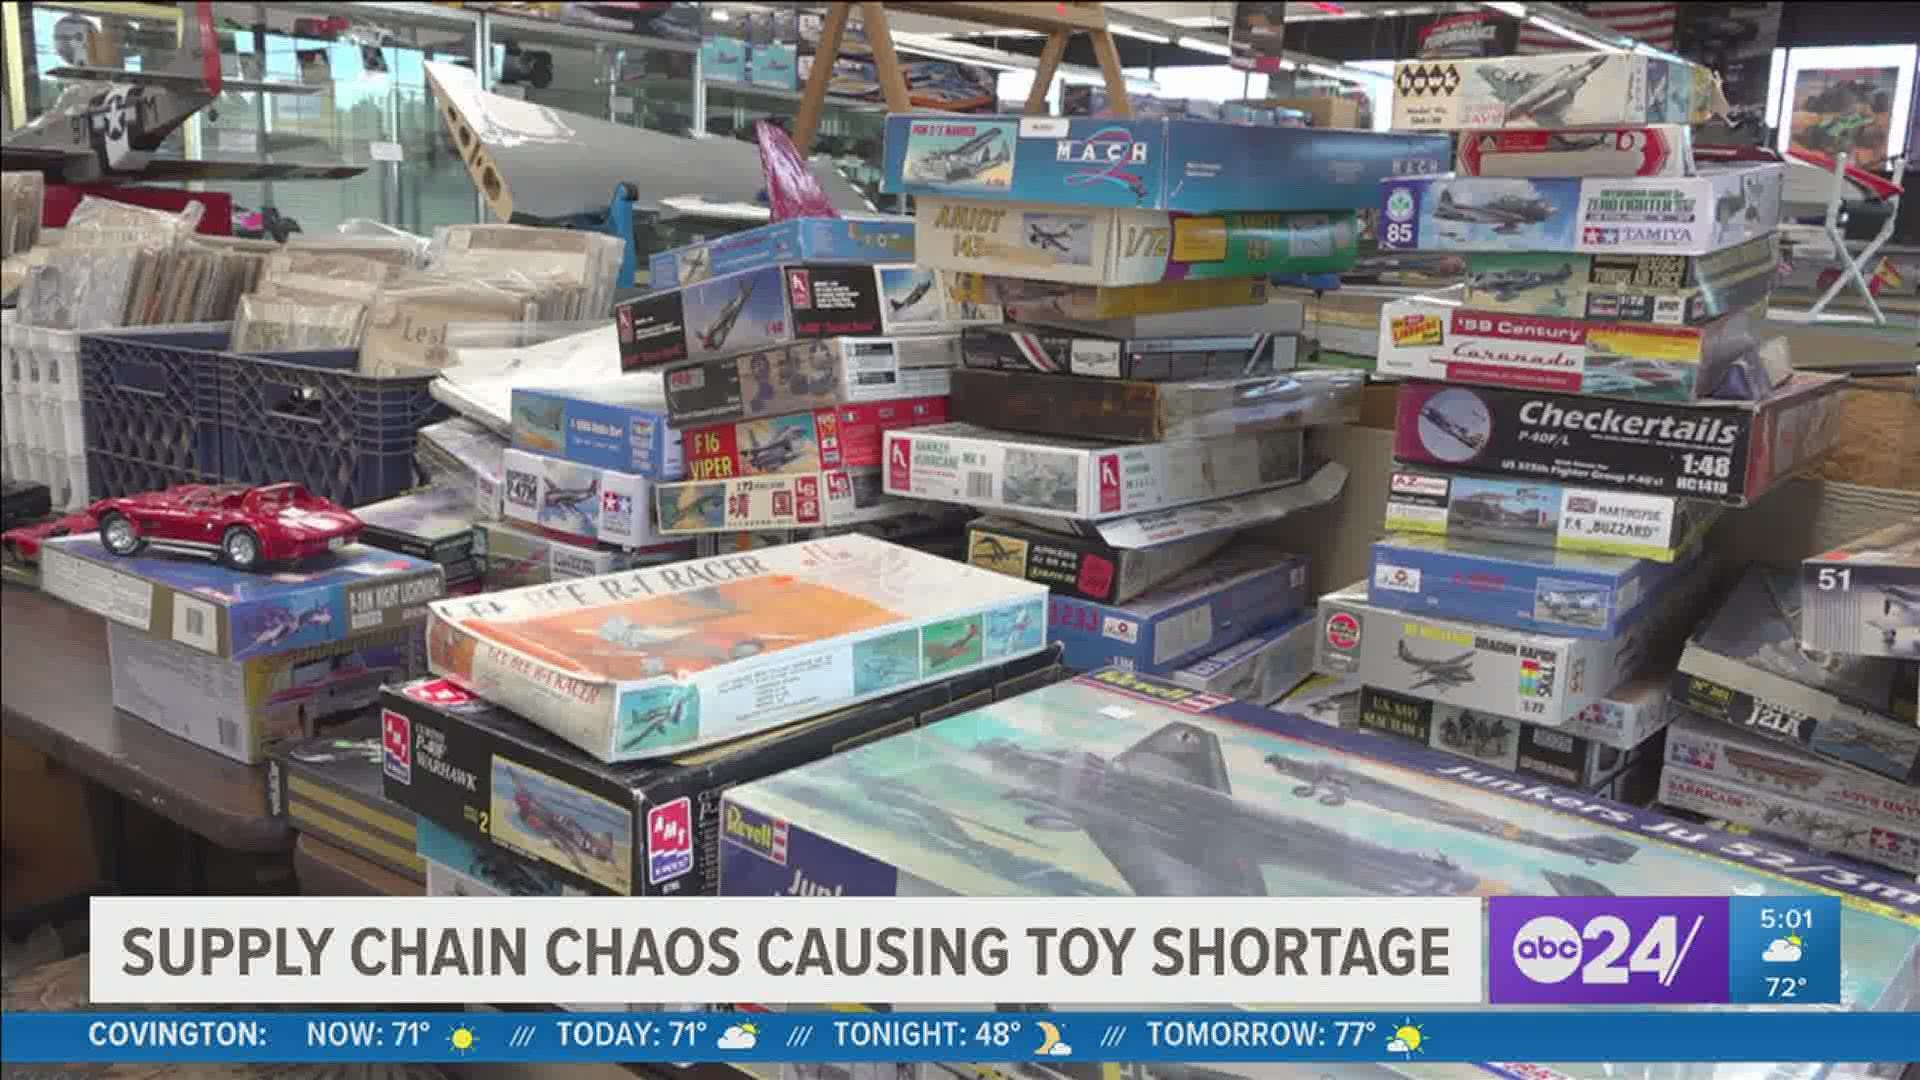 A Global supply chain crisis is forcing local businesses, including toy stores, to buy goods earlier as demand challenges intensify ahead of the holiday season.